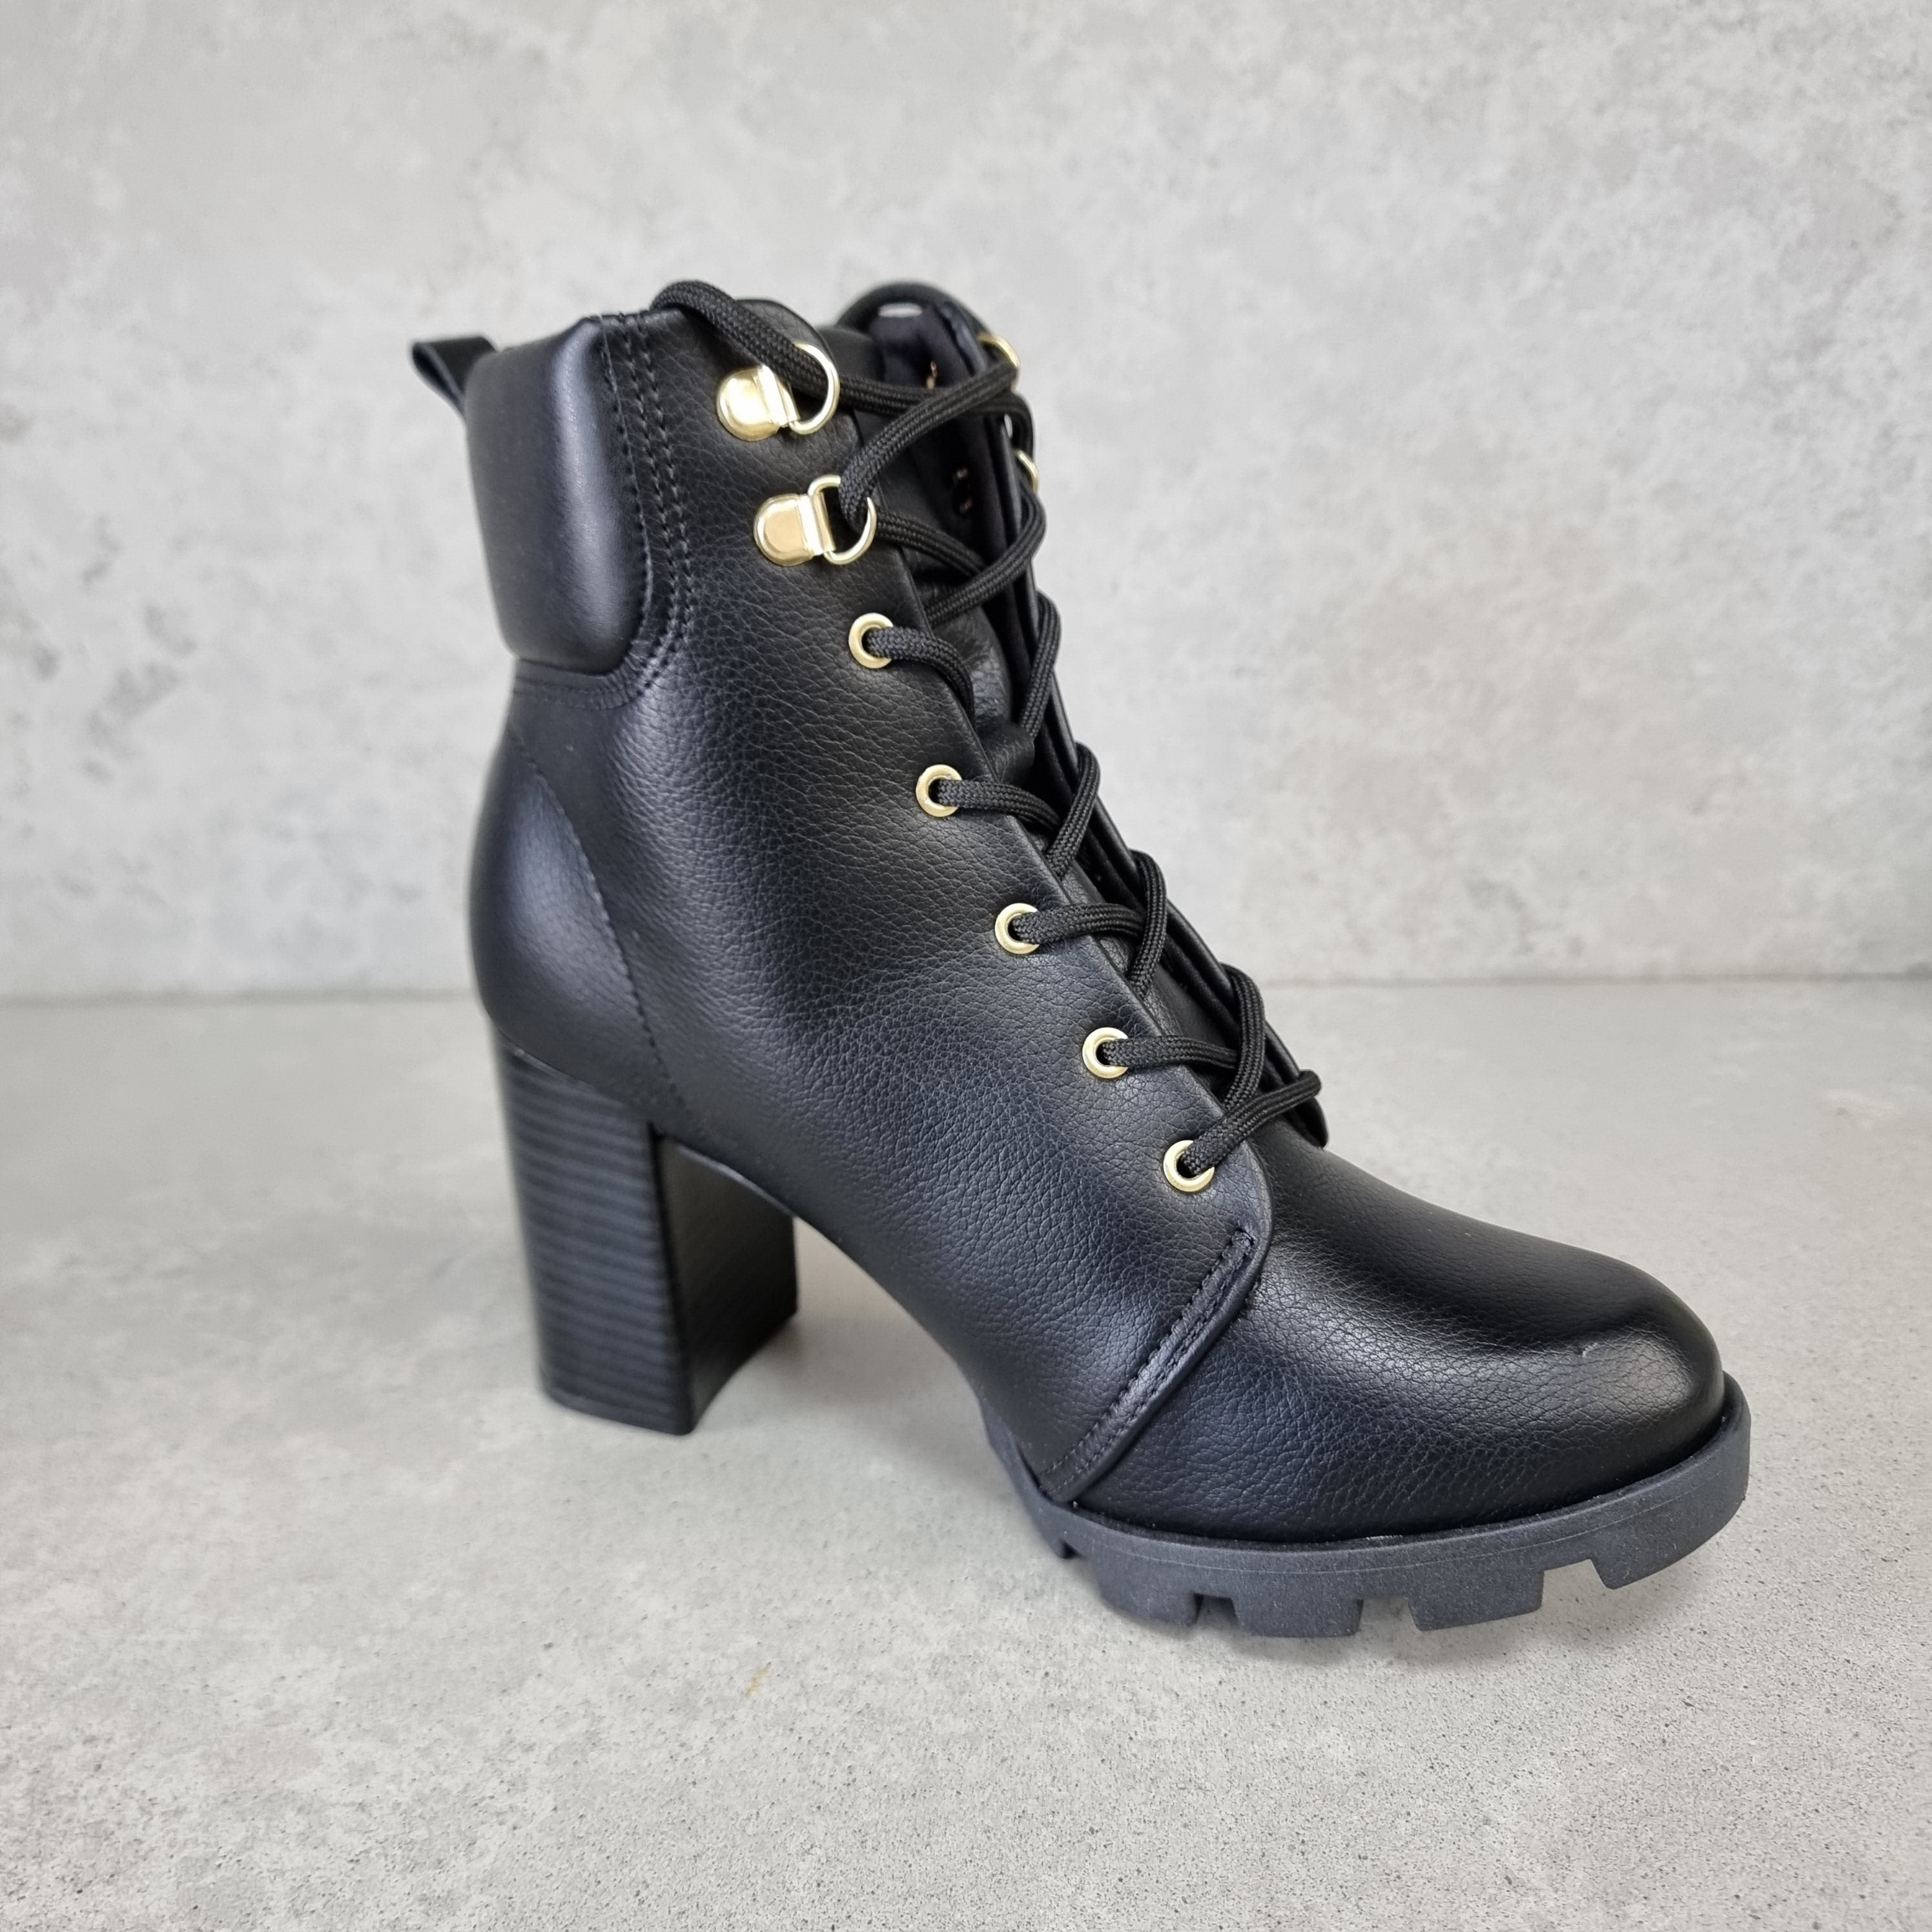 Beira Rio 9074-103 Lace-Up Block Heel Ankle Boot in Black Napa